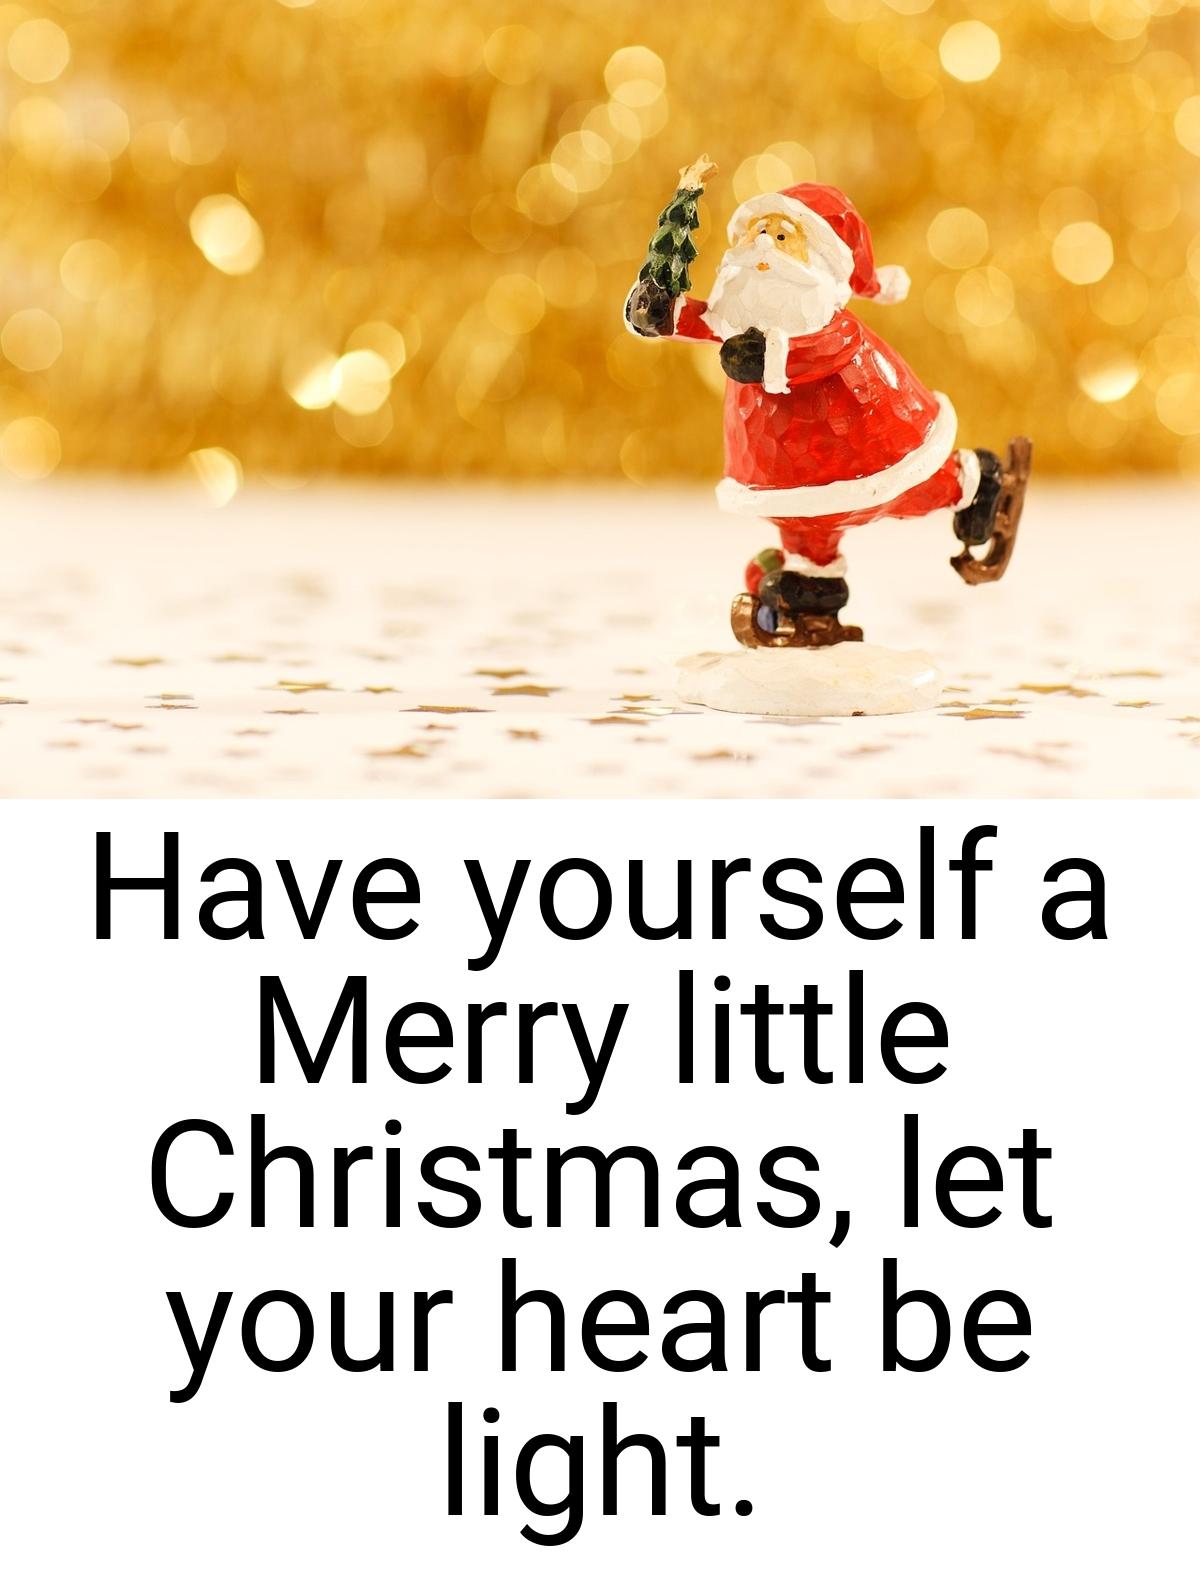 Have yourself a Merry little Christmas, let your heart be